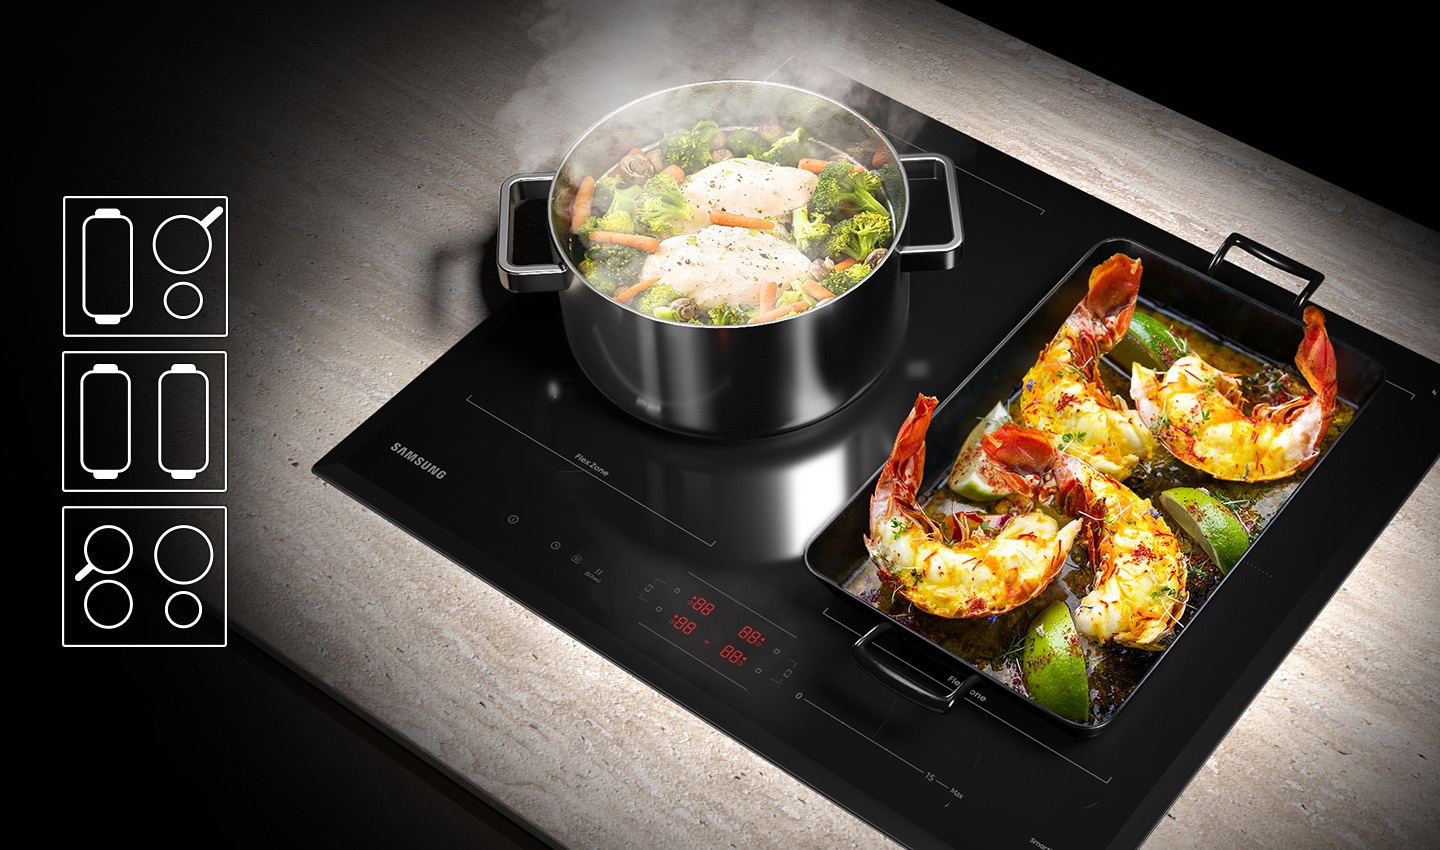 A round stockpot with a boiling chicken breast and vegetables is on the left Flex Zone, and the large square grill pan with lobster grilling is on the right Flex Zone. Icon shows the Dual Flex Zone can be used in three ways. First is one large rectangle-shaped cookware, one medium sized cookware and small sized cookware. Second is two large rectangle-shaped cookware. Third two medium sized cook ware and two small sized cookware.